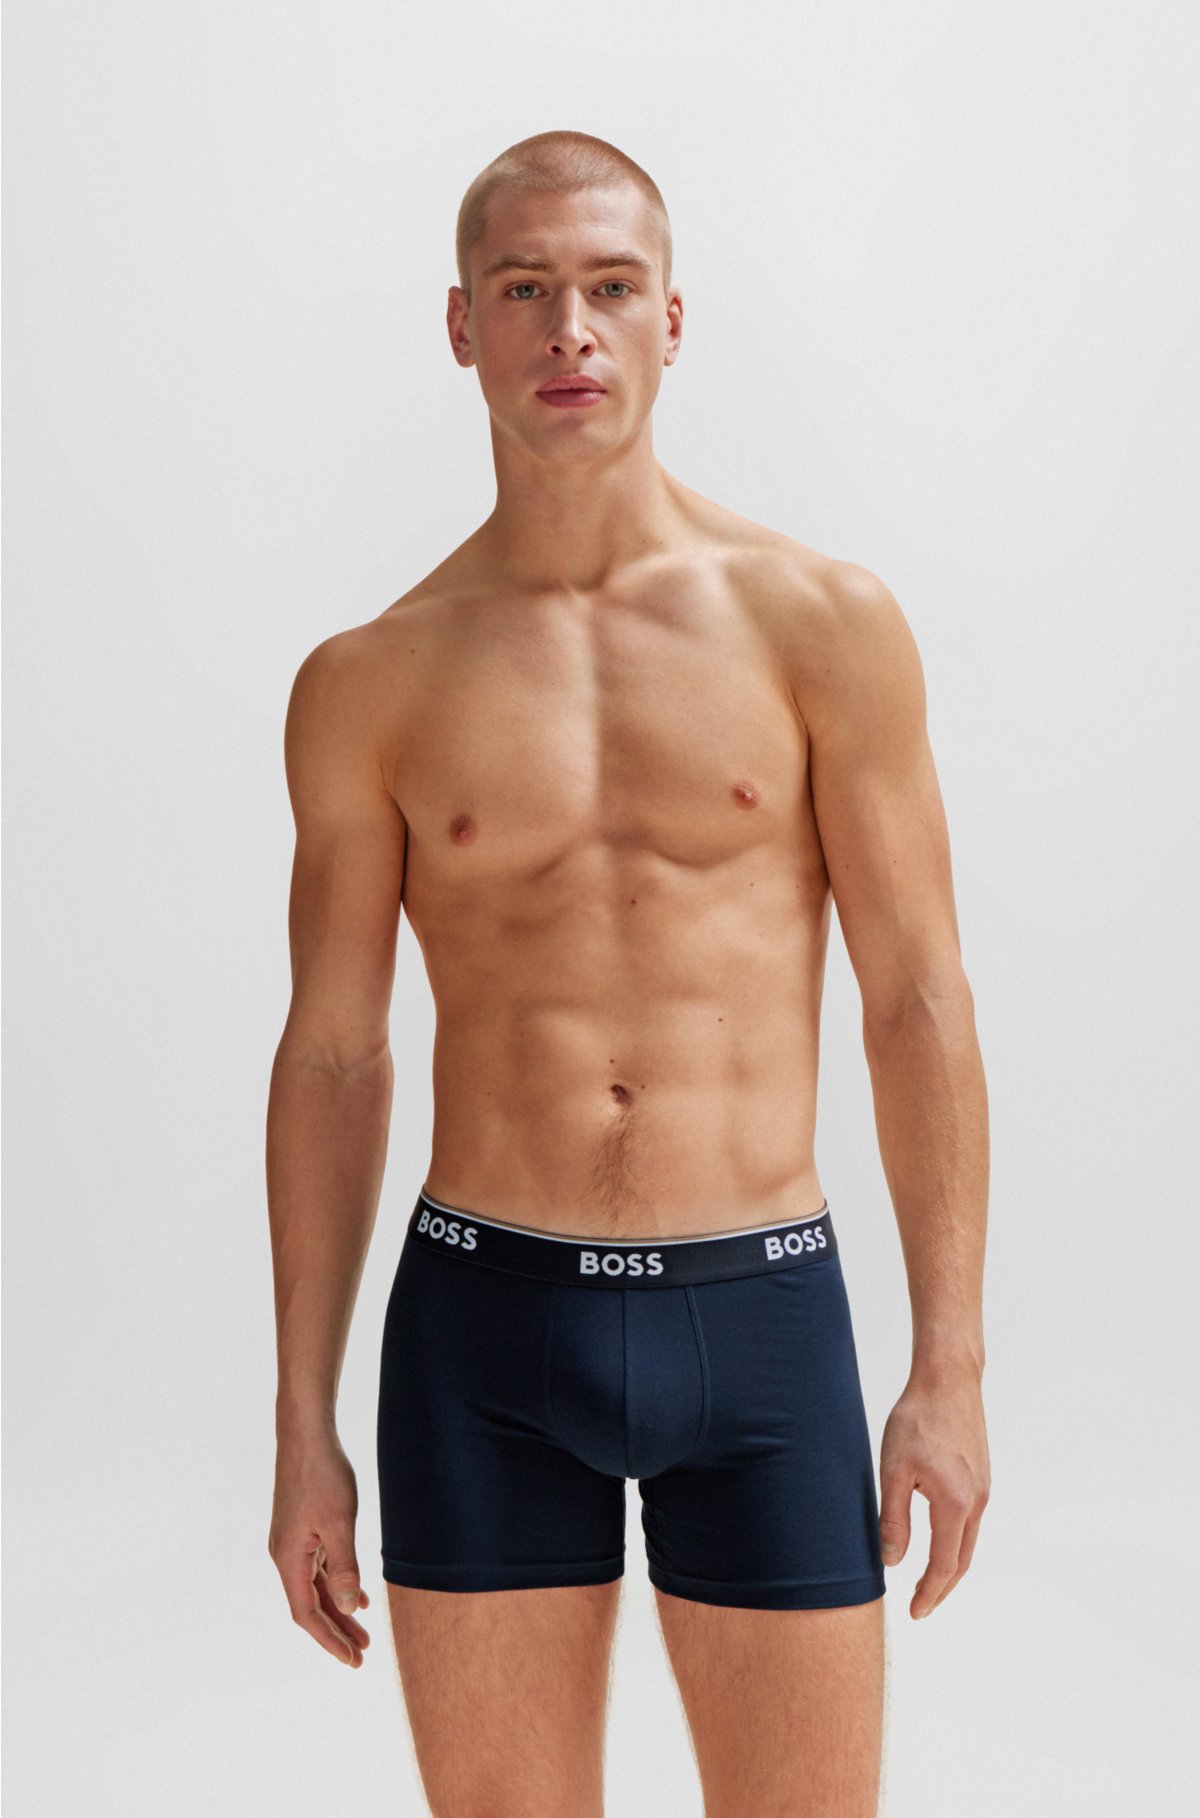 BOSS stretch-cotton Three-pack - boxer of logos with briefs